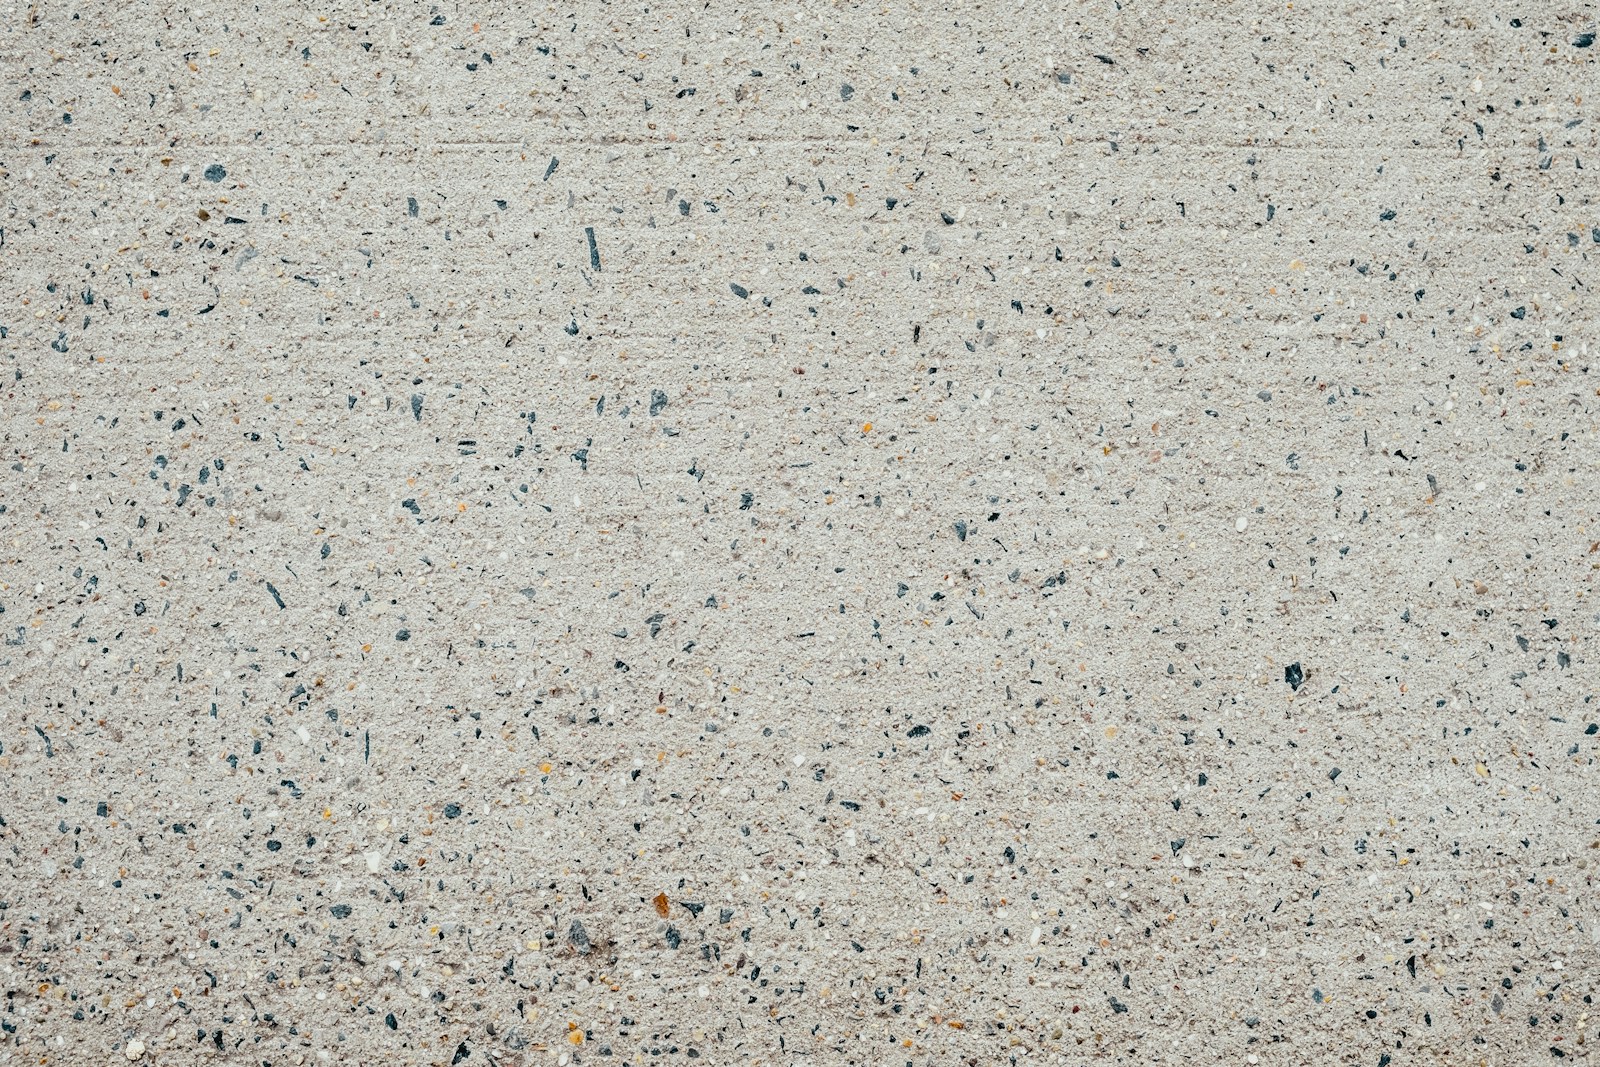 a close up of a cement surface with small black dots